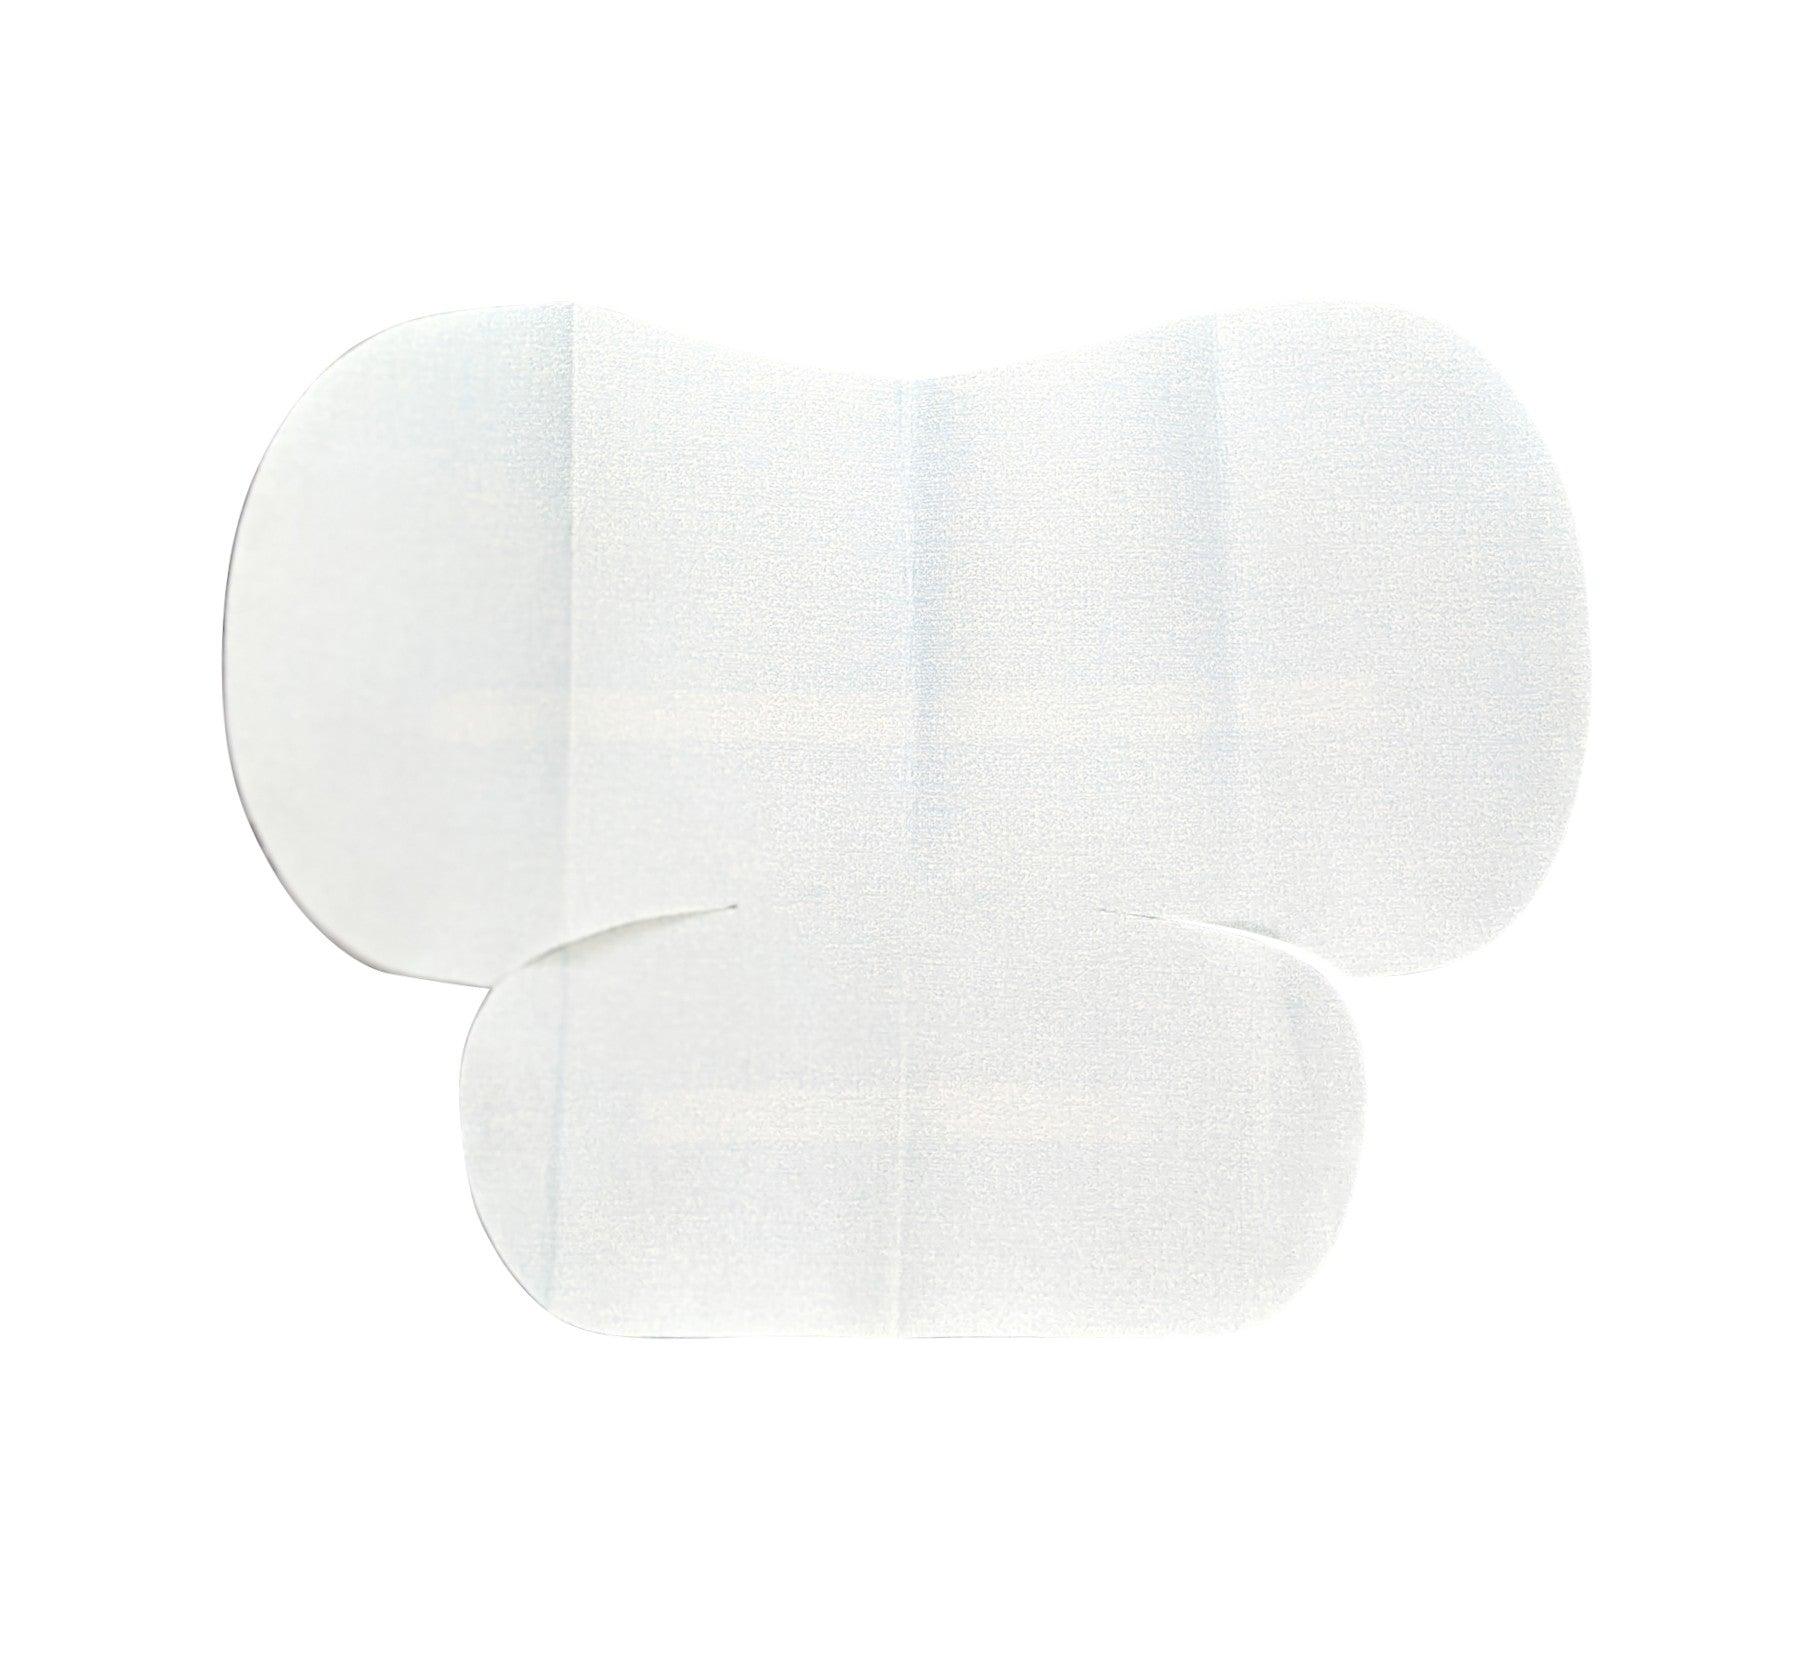 Breg® Polar Care Cube & Glacier Sterile Dressings - 04908 Breg® Polar Care Cube & Glacier Sterile Dressings - undefined by Supply Physical Therapy Accessories, Breg, Breg Accessories, Cube, Cube Accessories, Glacier, Glacier Accessories, Replacement, Sterile, Wraps